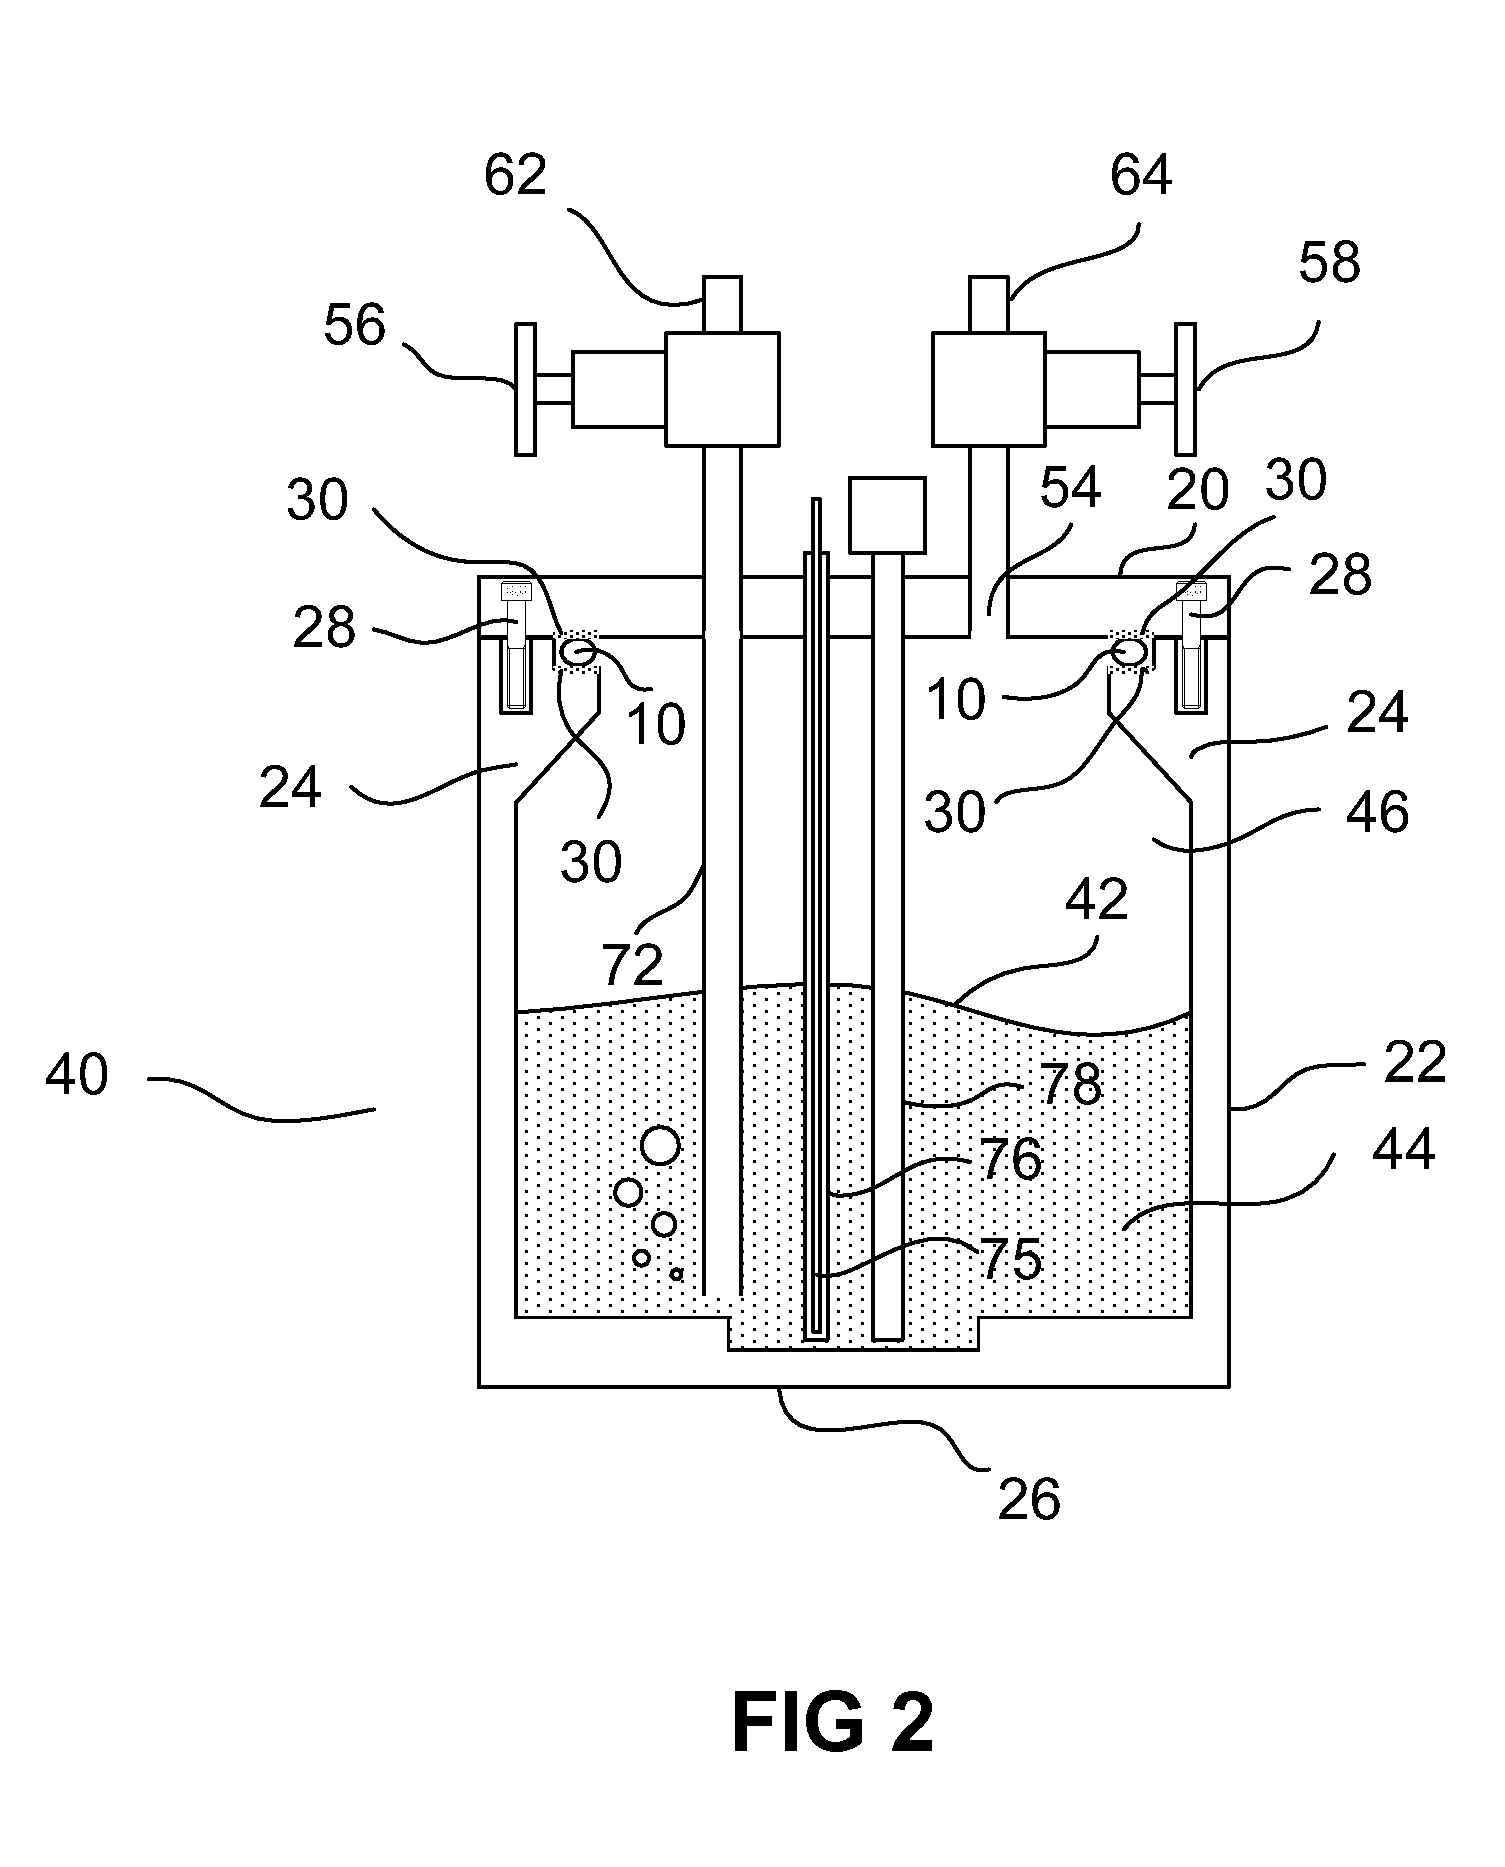 Apparatus and method for delivering vapor phase reagent to a deposition chamber